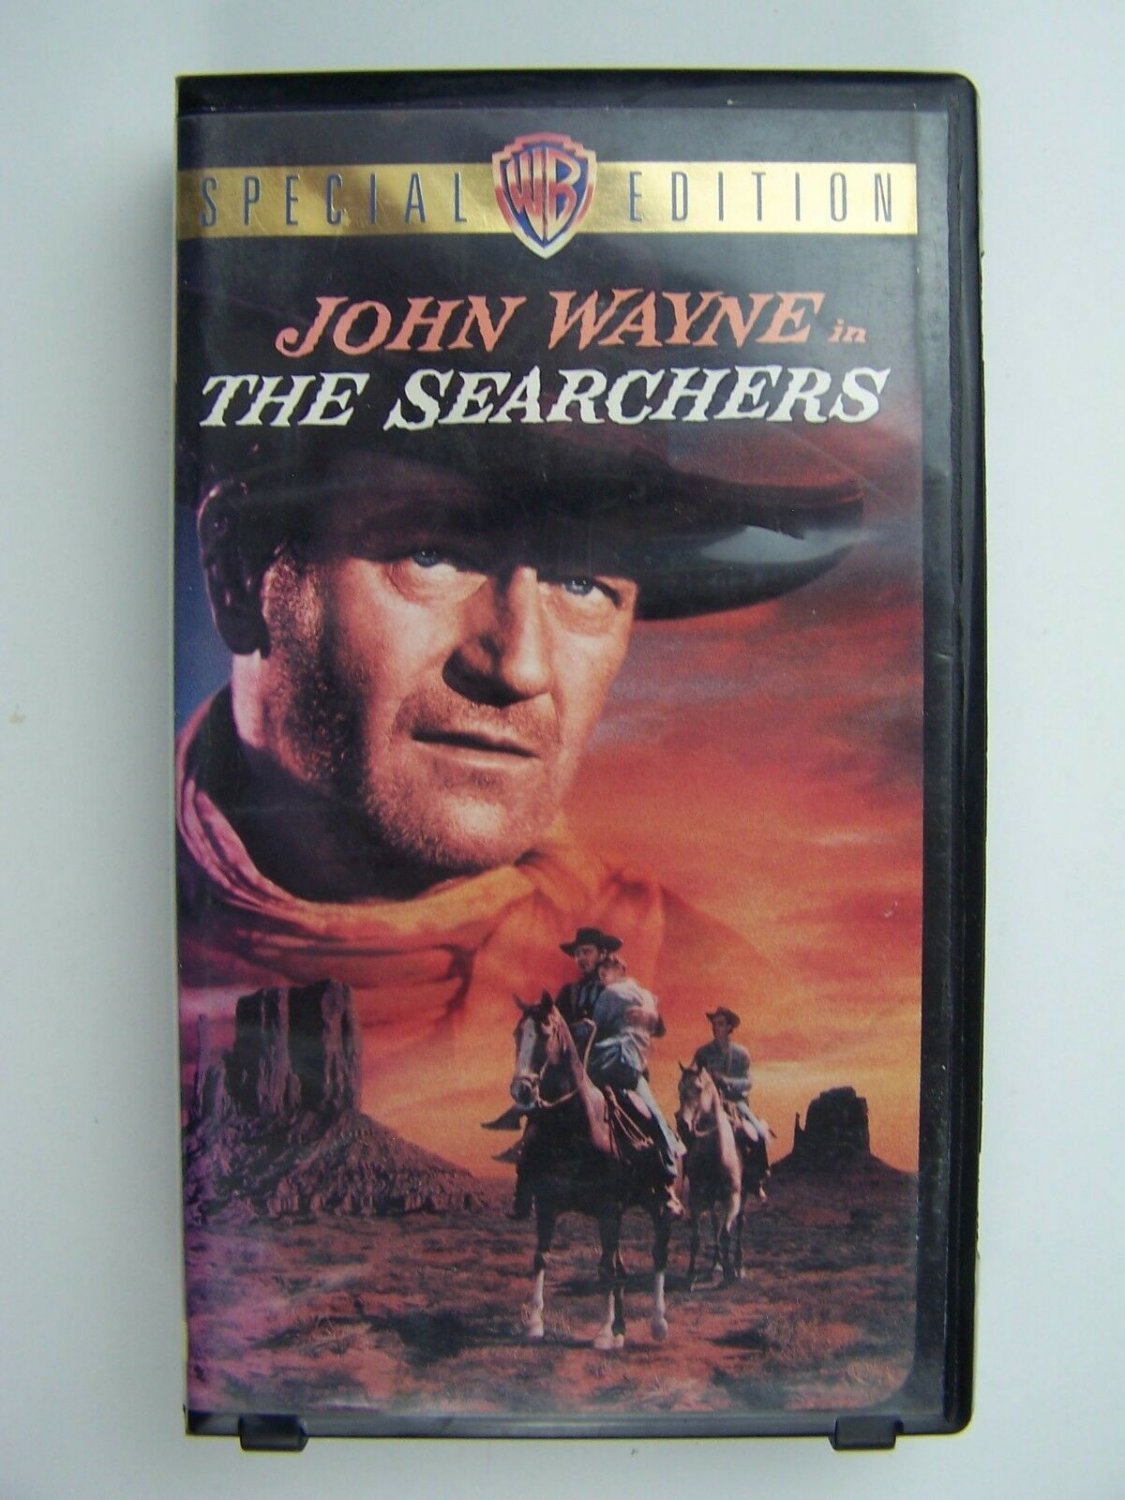 John Wayne The Searchers VHS Special Edition Video Tape